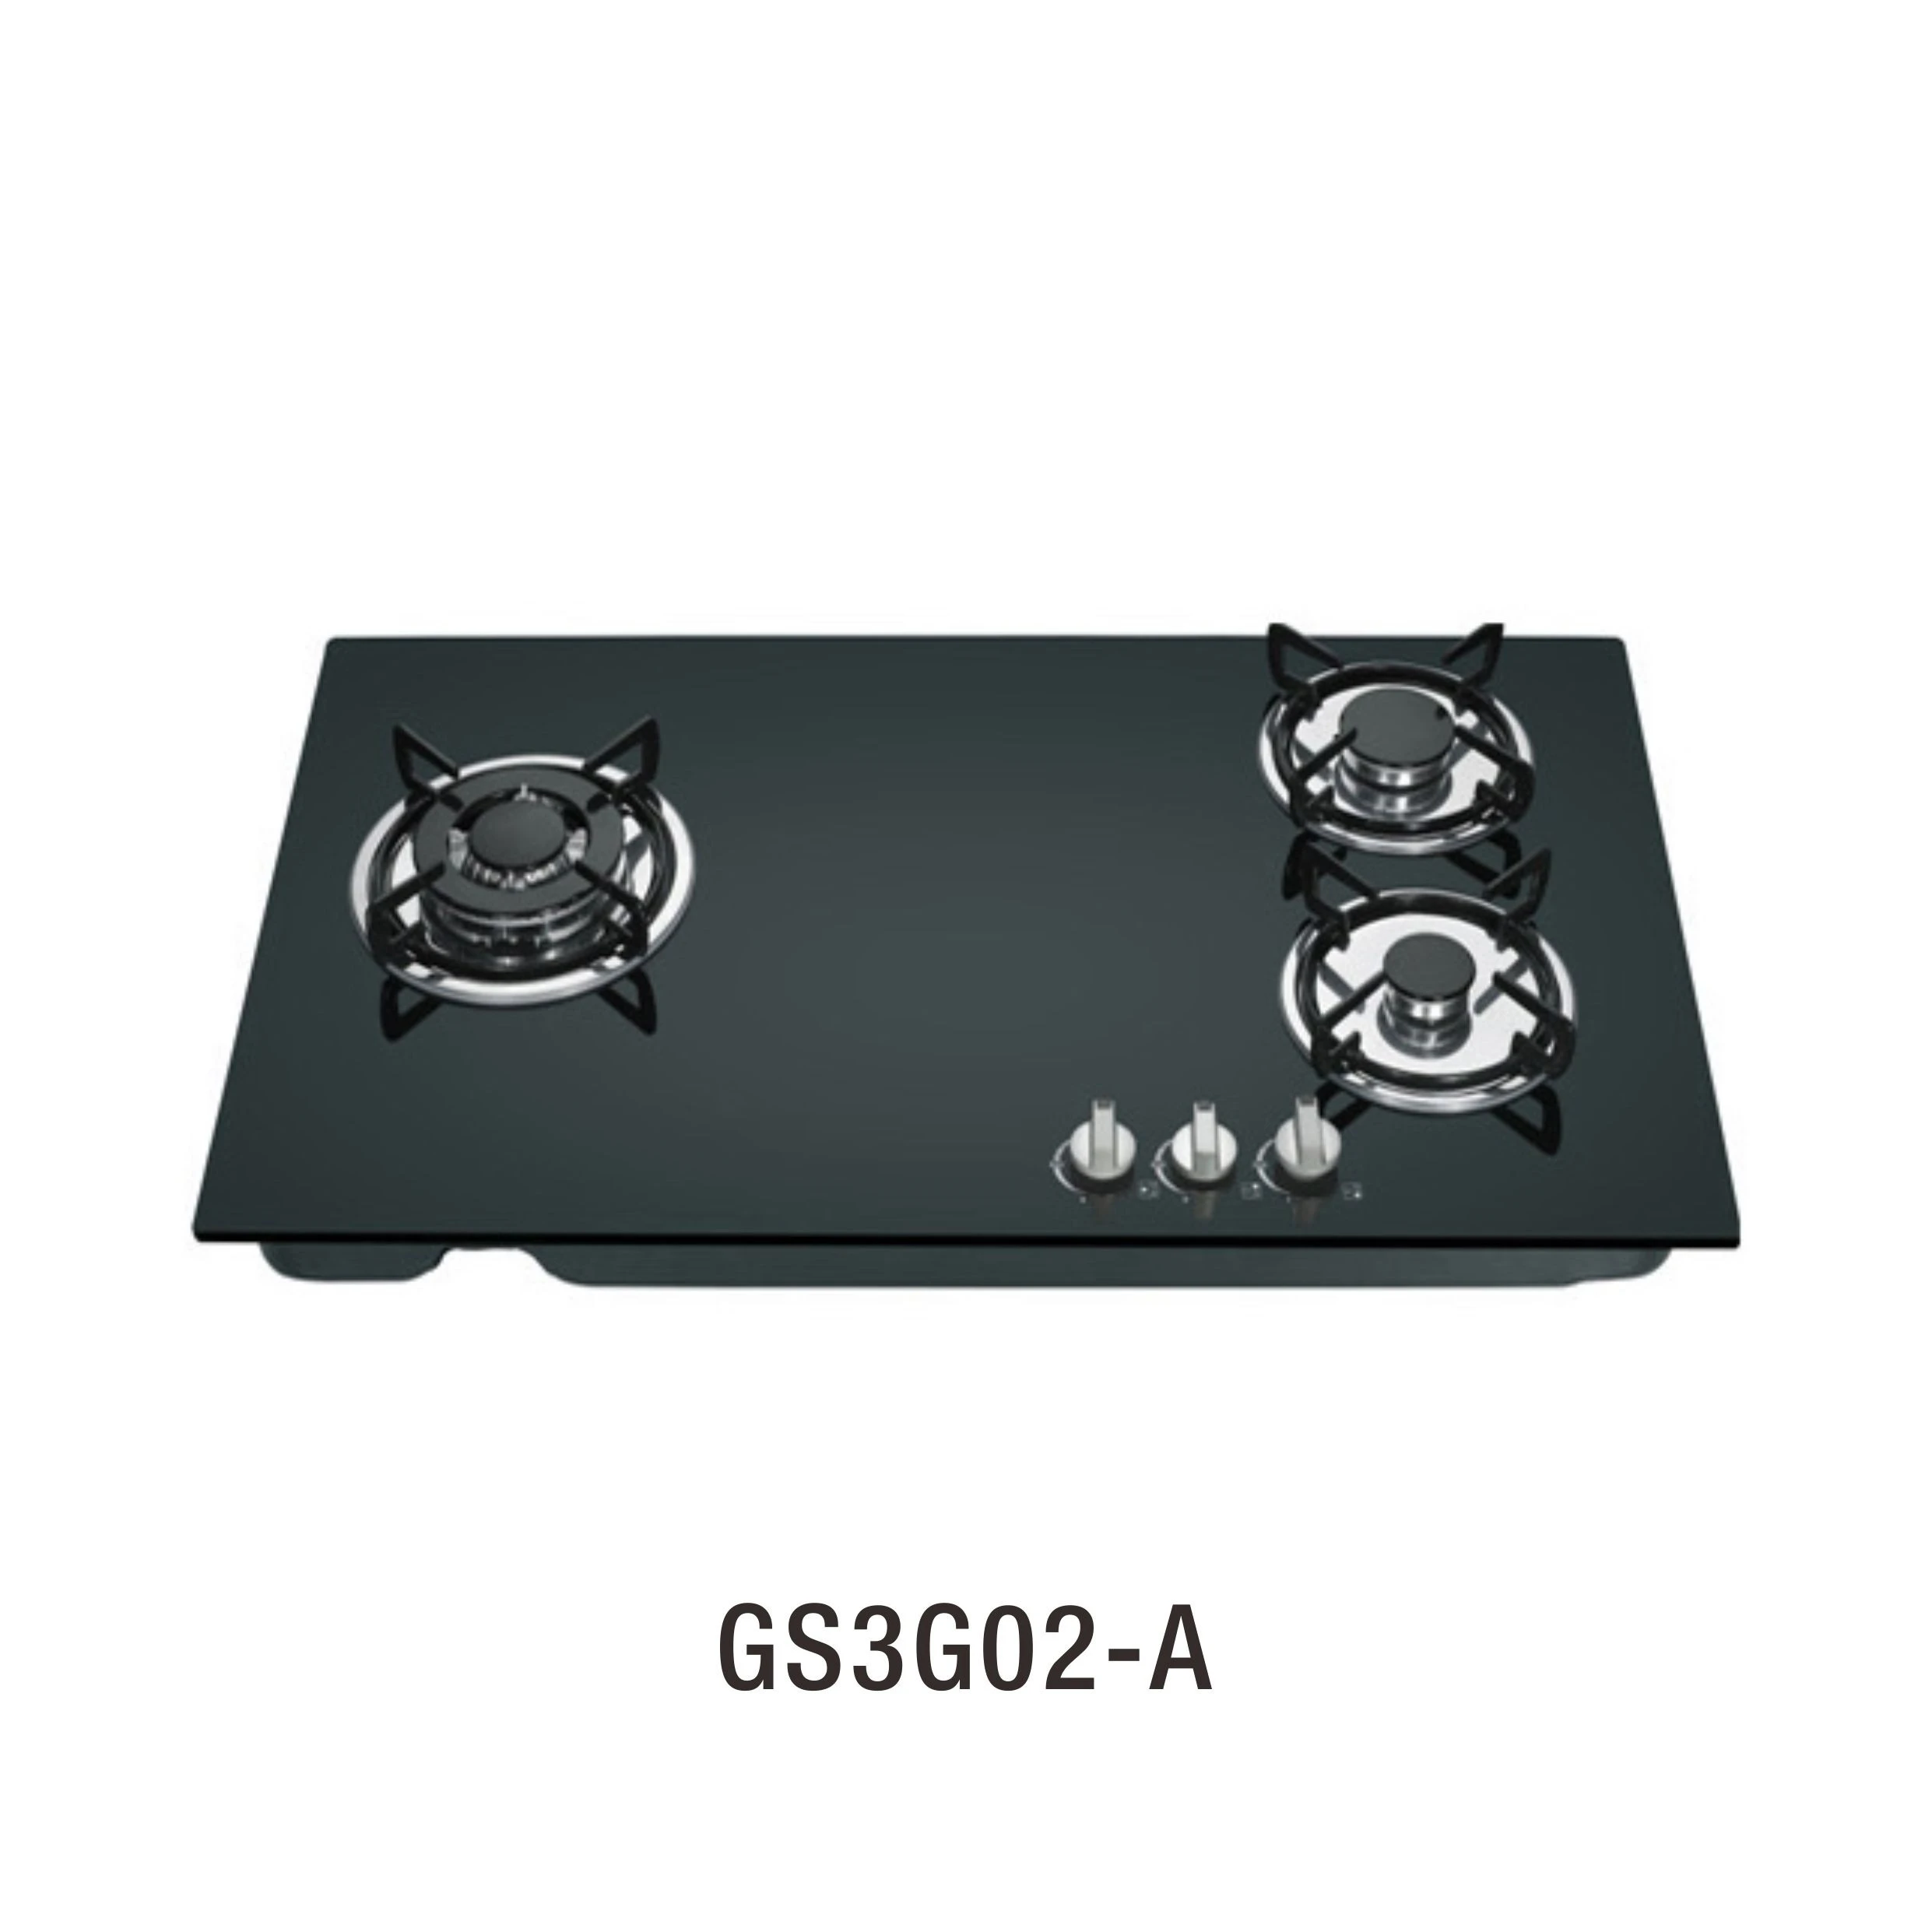 High Quality 3 burner glass top cooking stove cooker gas with flame out safety device